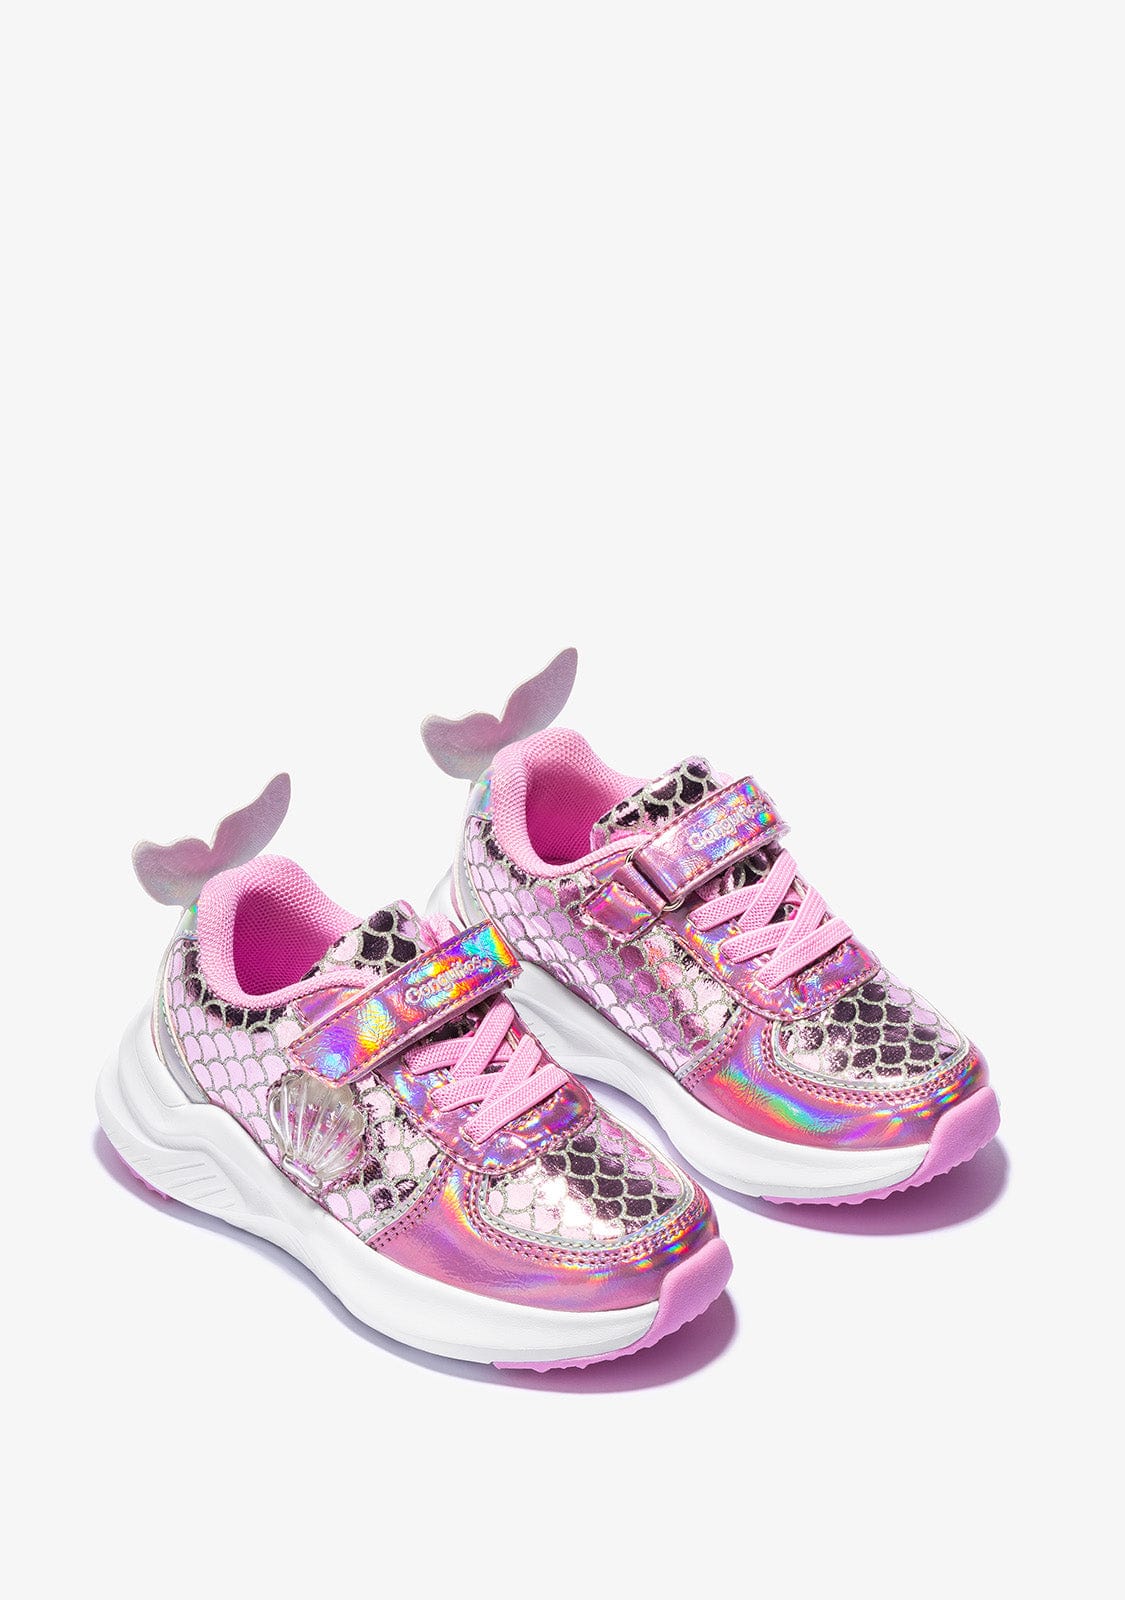 CONGUITOS Shoes Girl's Pink With Lights Mermaid Sneakers